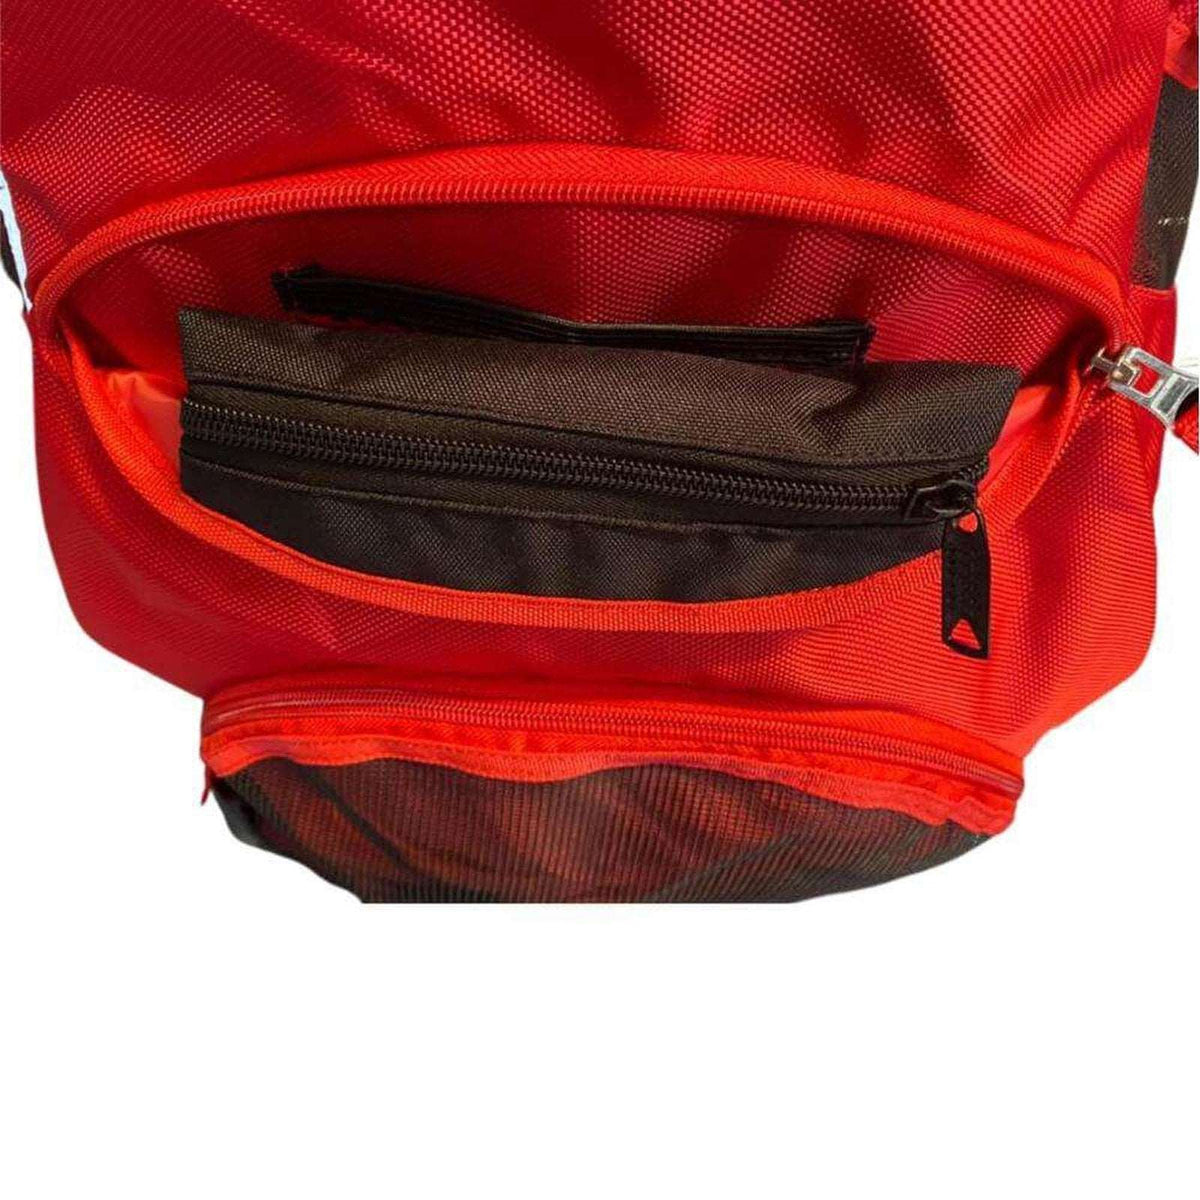 Lutra Premium Team Backpack 45 Litre - Red